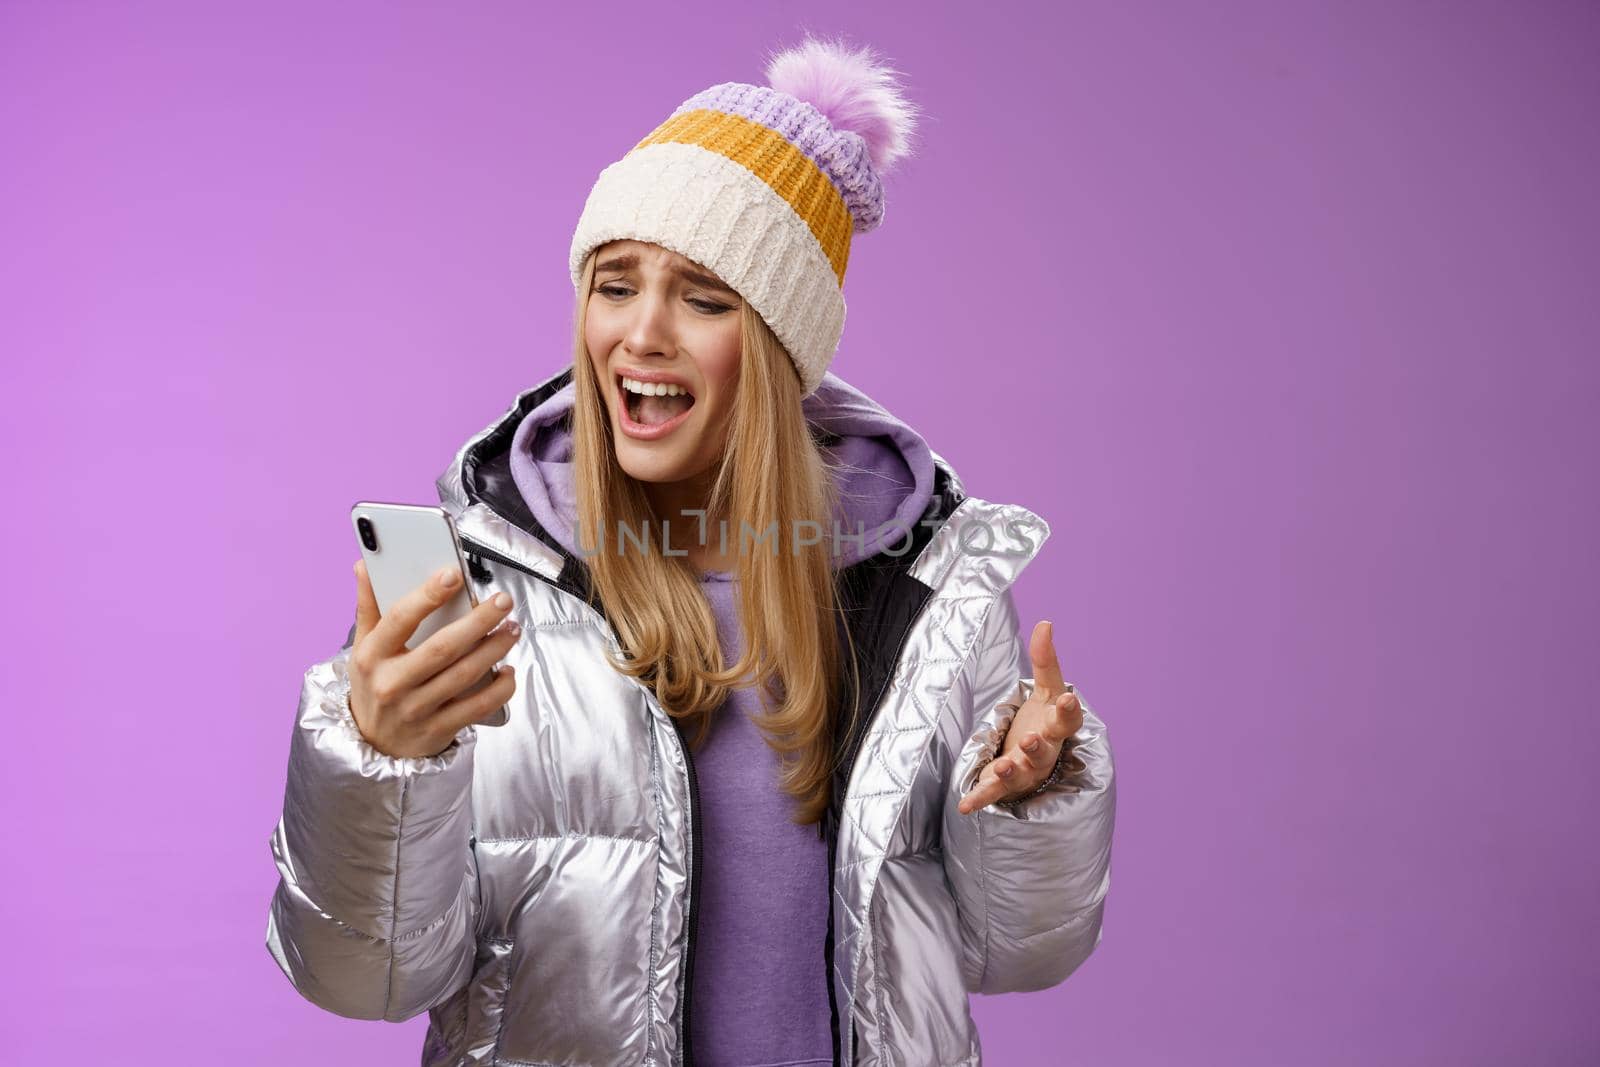 Bothered complaining dissatisfied cute blond girl yelling stupid smartphone standing unhappy recording audio message whining yelling mobile phone upset, standing purple background. Technology concept